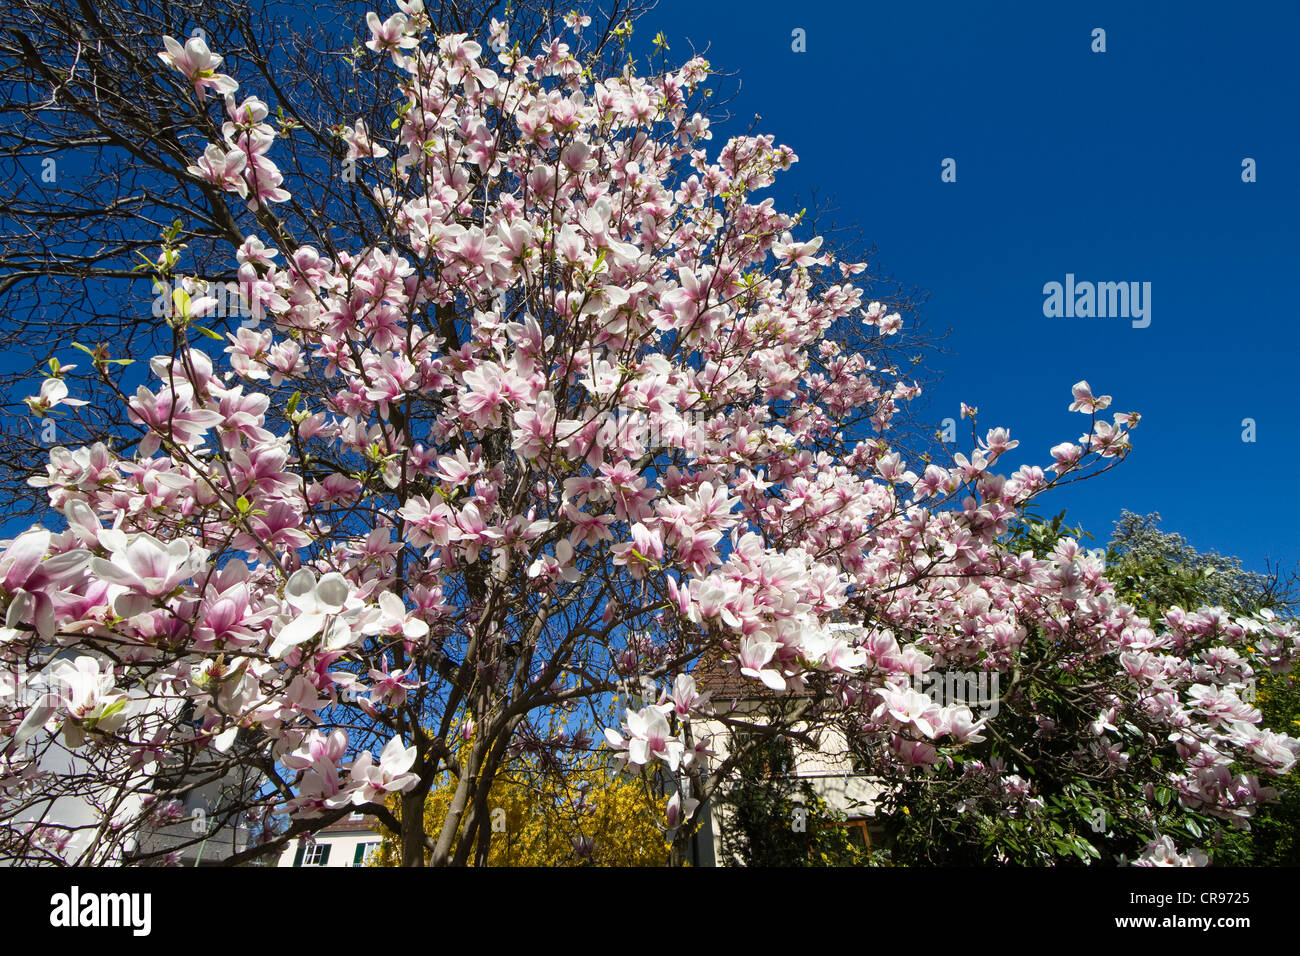 Blooming magnolia trees (Magnolia spec.) in a garden, Bavaria, Germany, Europe Stock Photo